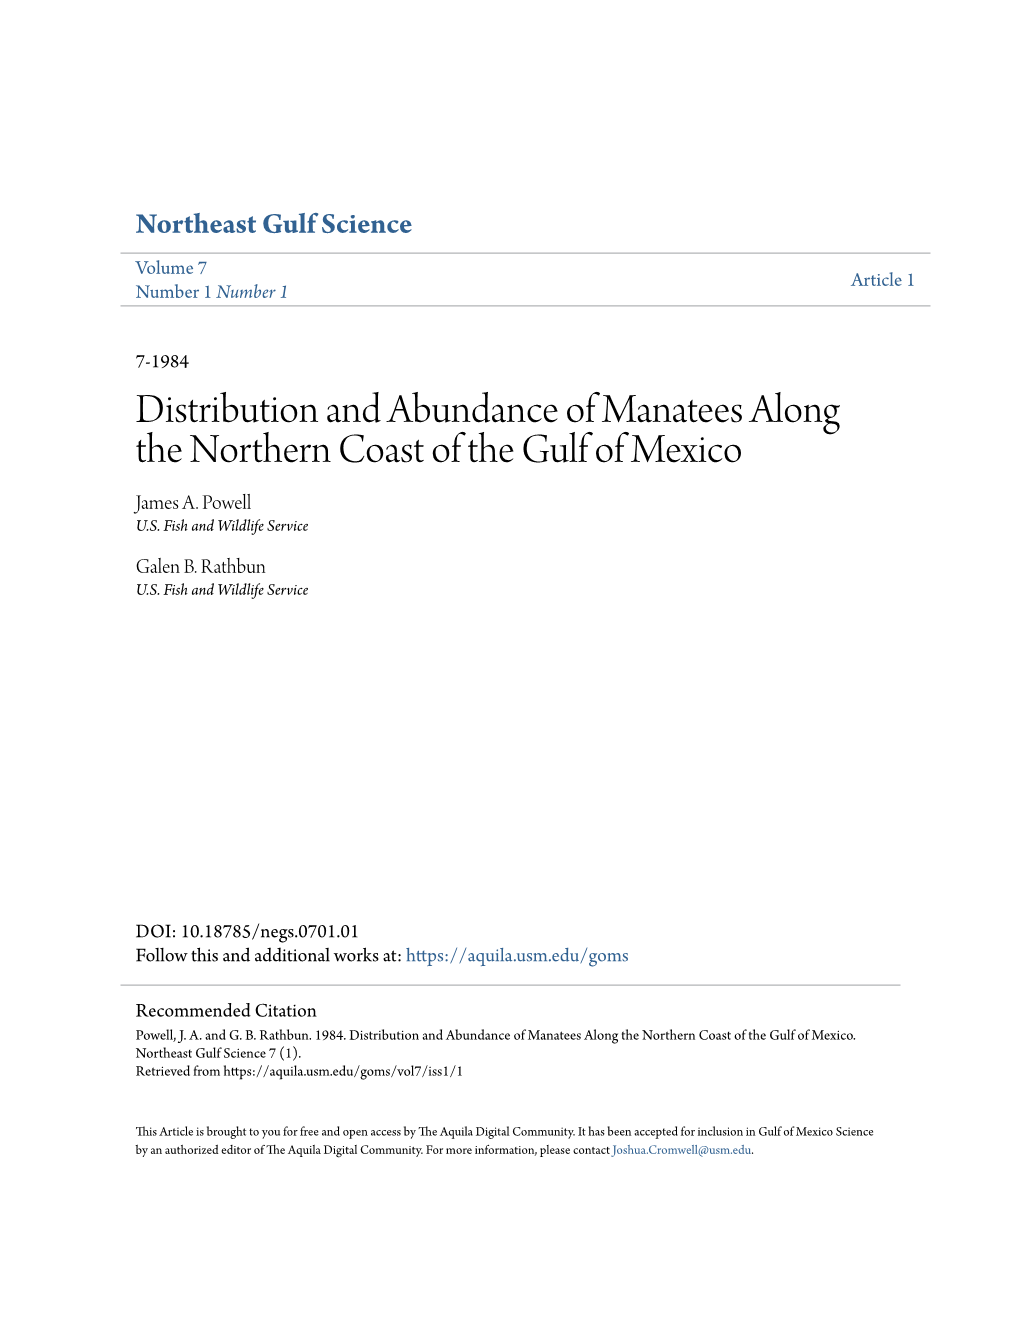 Distribution and Abundance of Manatees Along the Northern Coast of the Gulf of Mexico James A